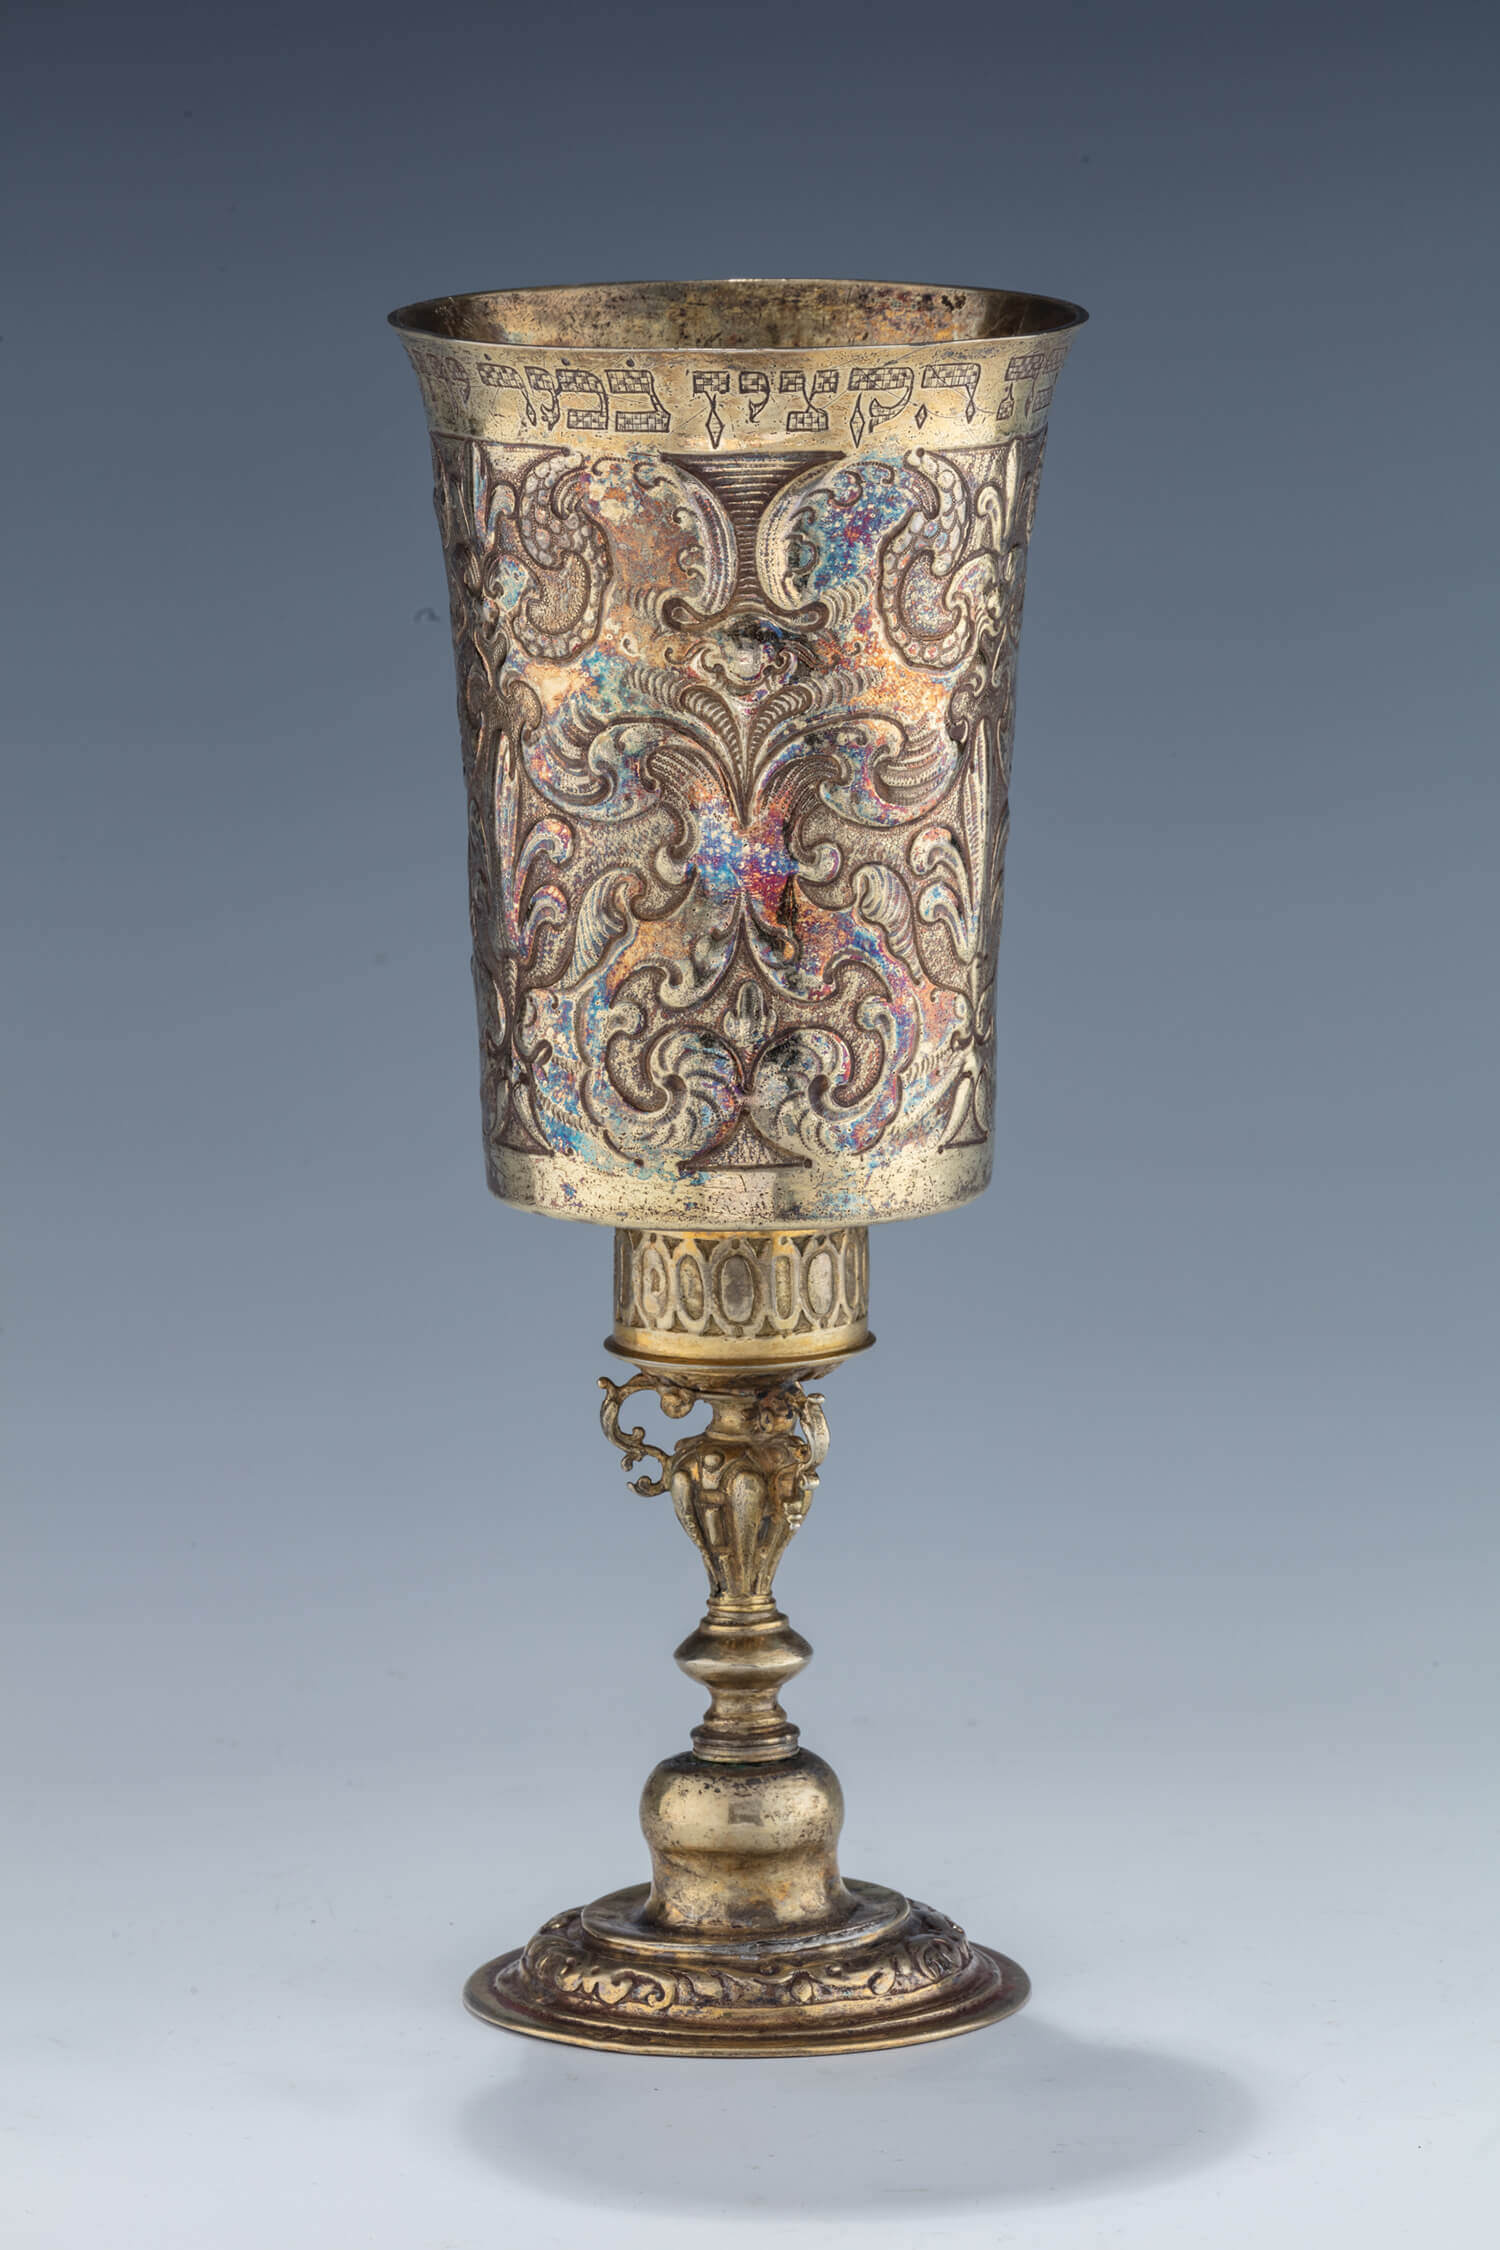 091. A MONUMENTAL GILDED SILVER KIDDUSH CUP BY ANDREAS GILG I